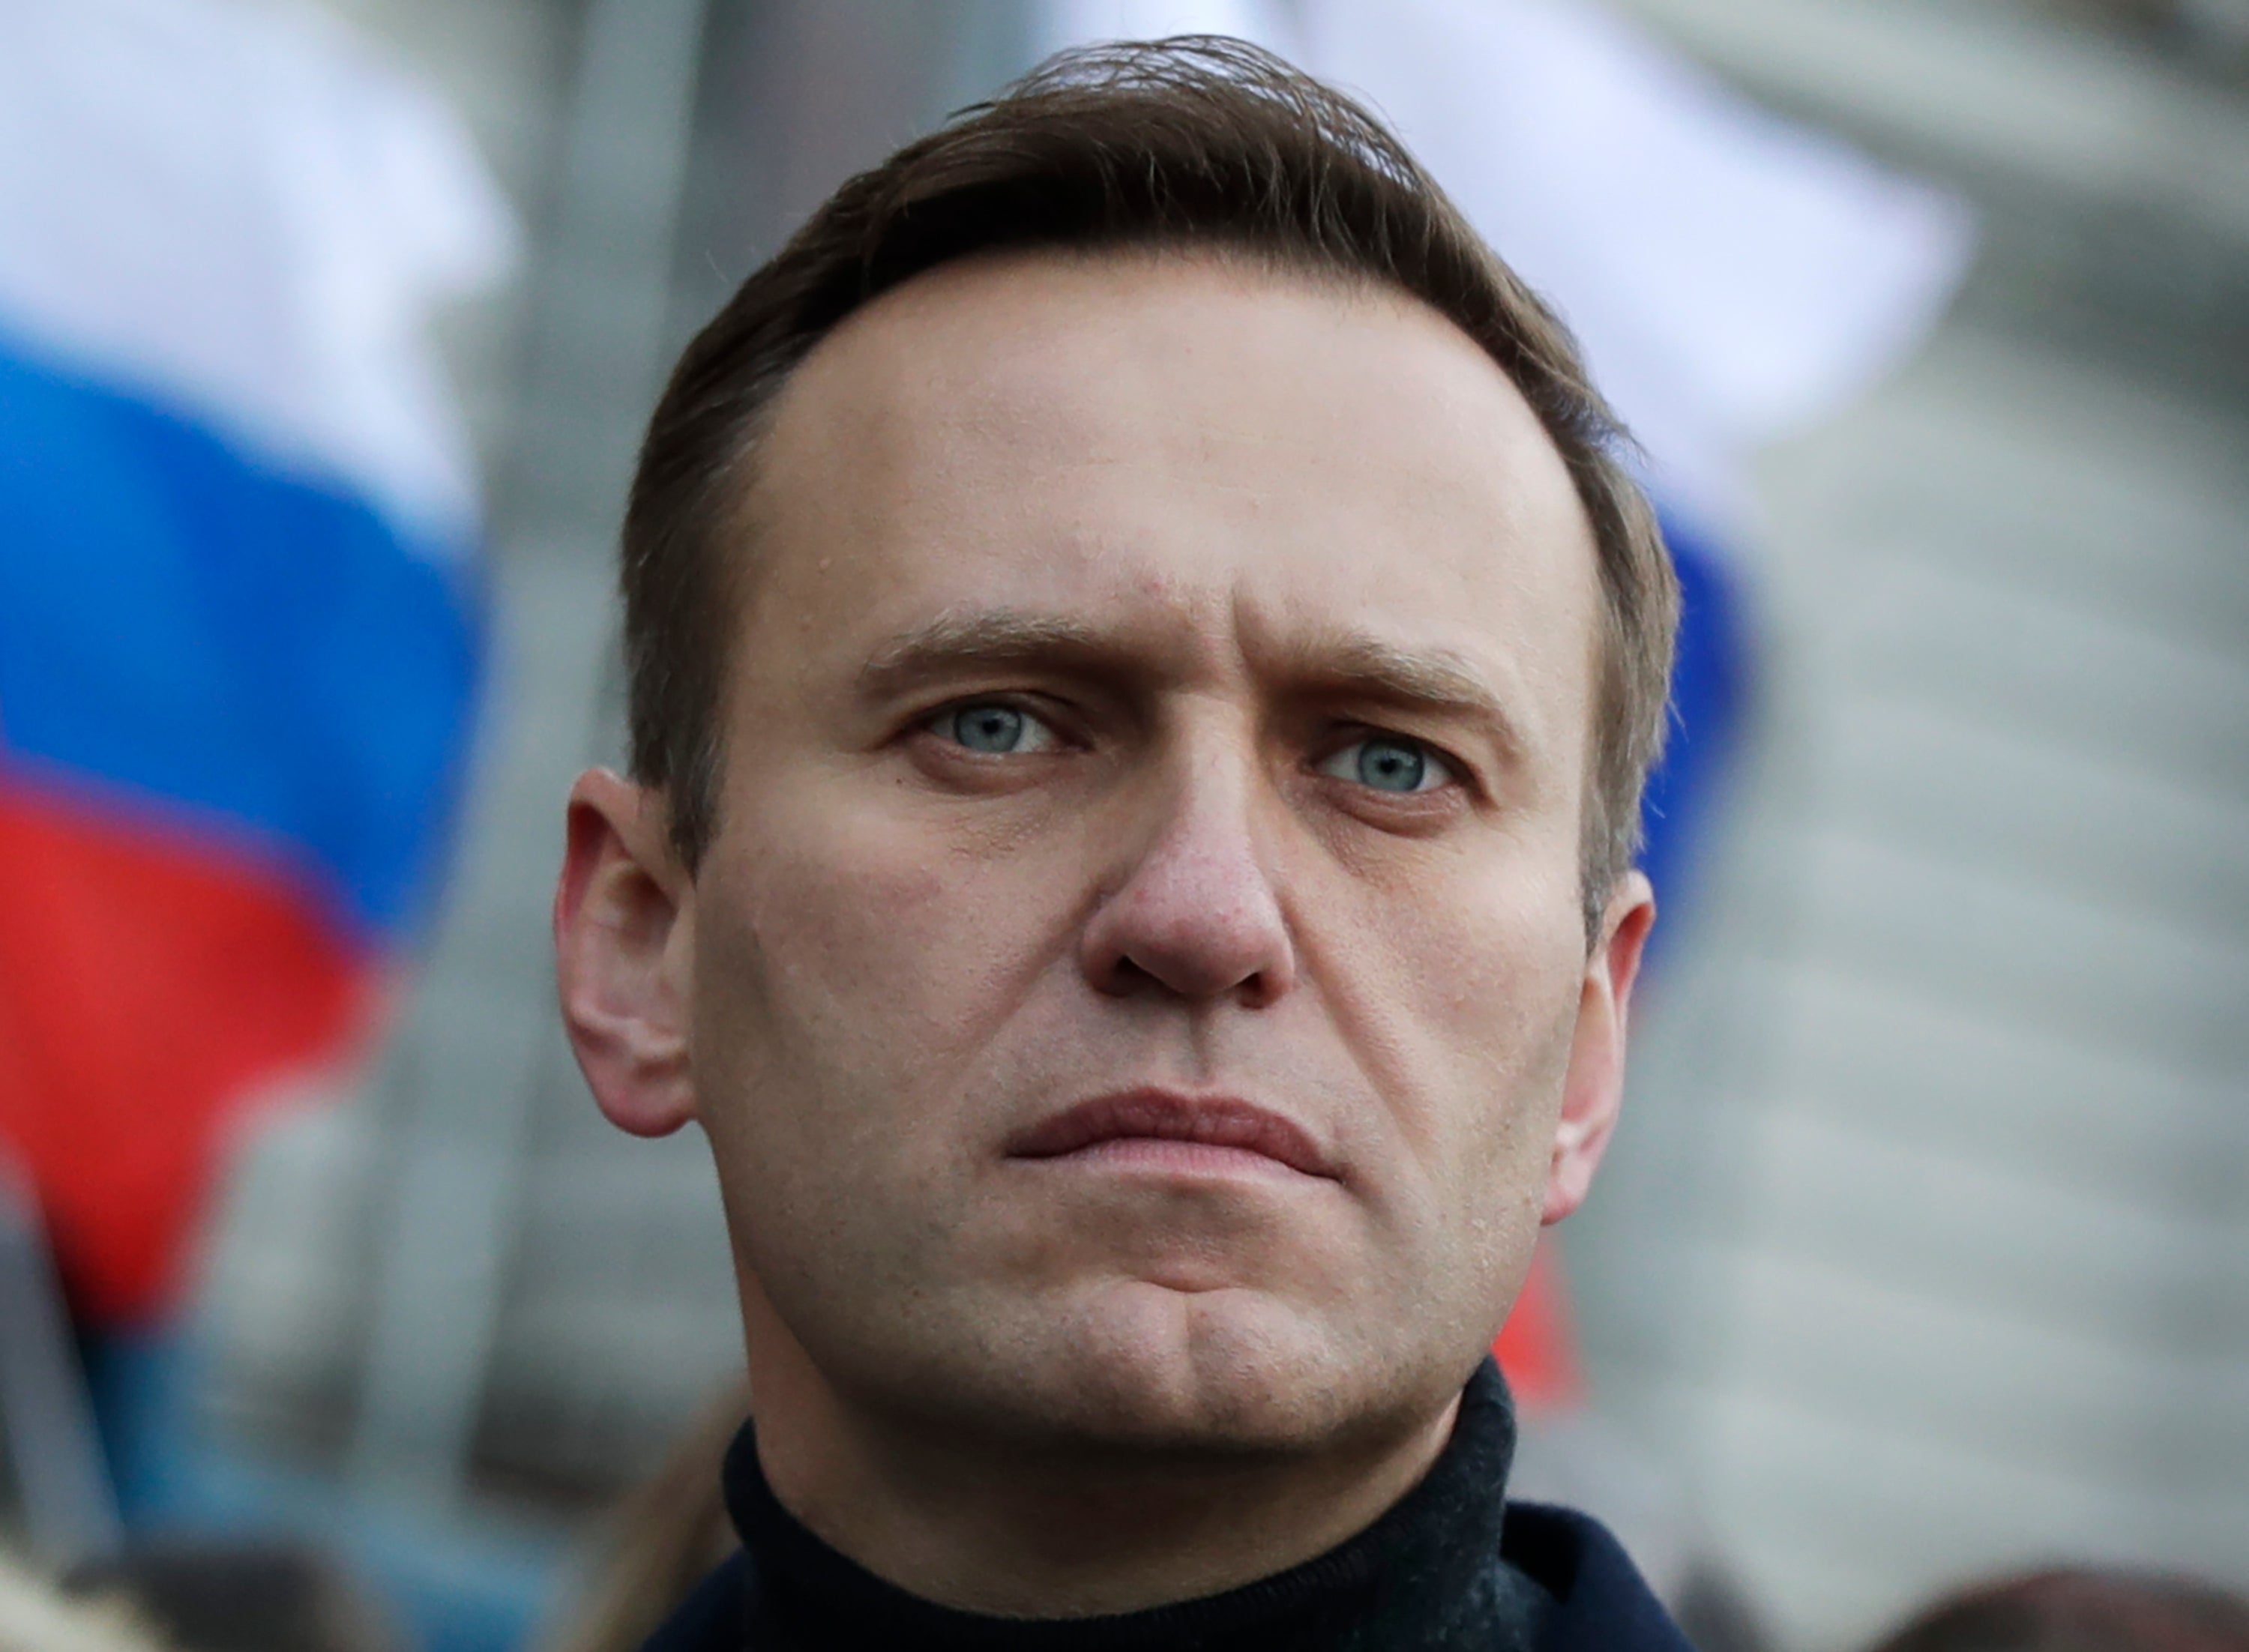 The UK had urged Putin’s Russia to abide by European court injunction in Alexei Navalny’s case